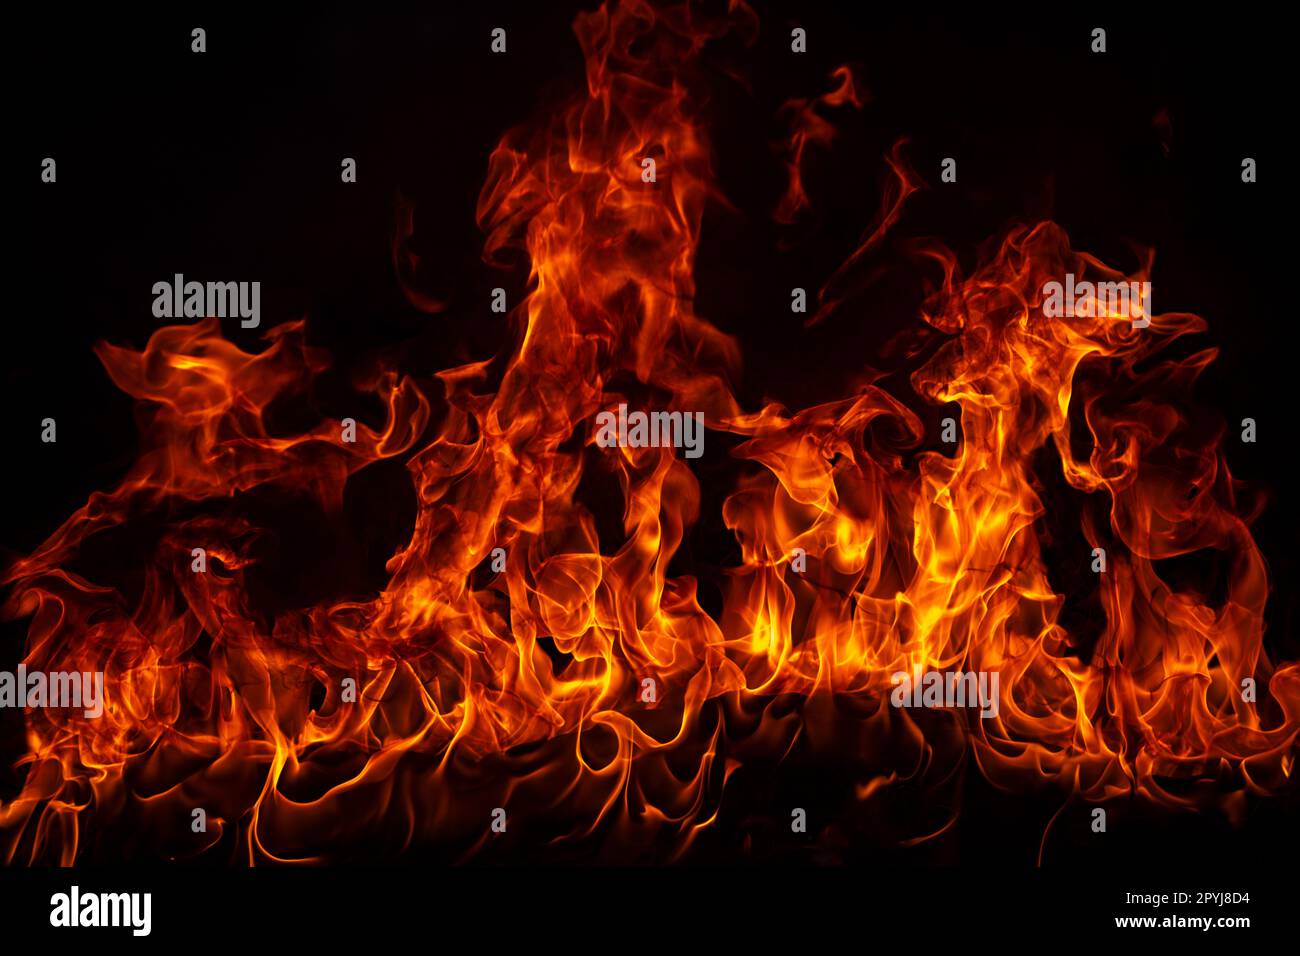 Fire blaze flames on black background. Fire burn flame isolated, abstract texture. Flaming explosion effect with burning fire. Stock Photo